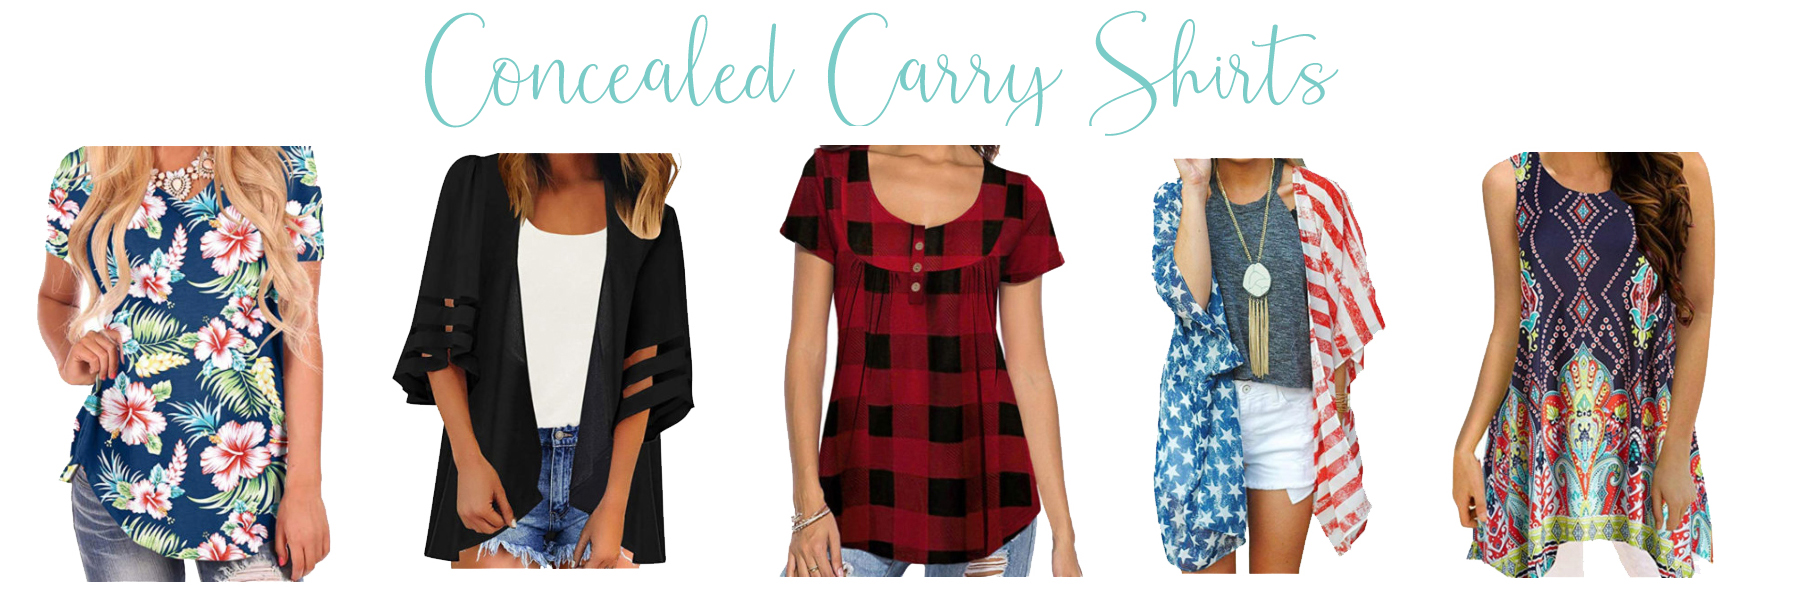 concealed-carry-shirts